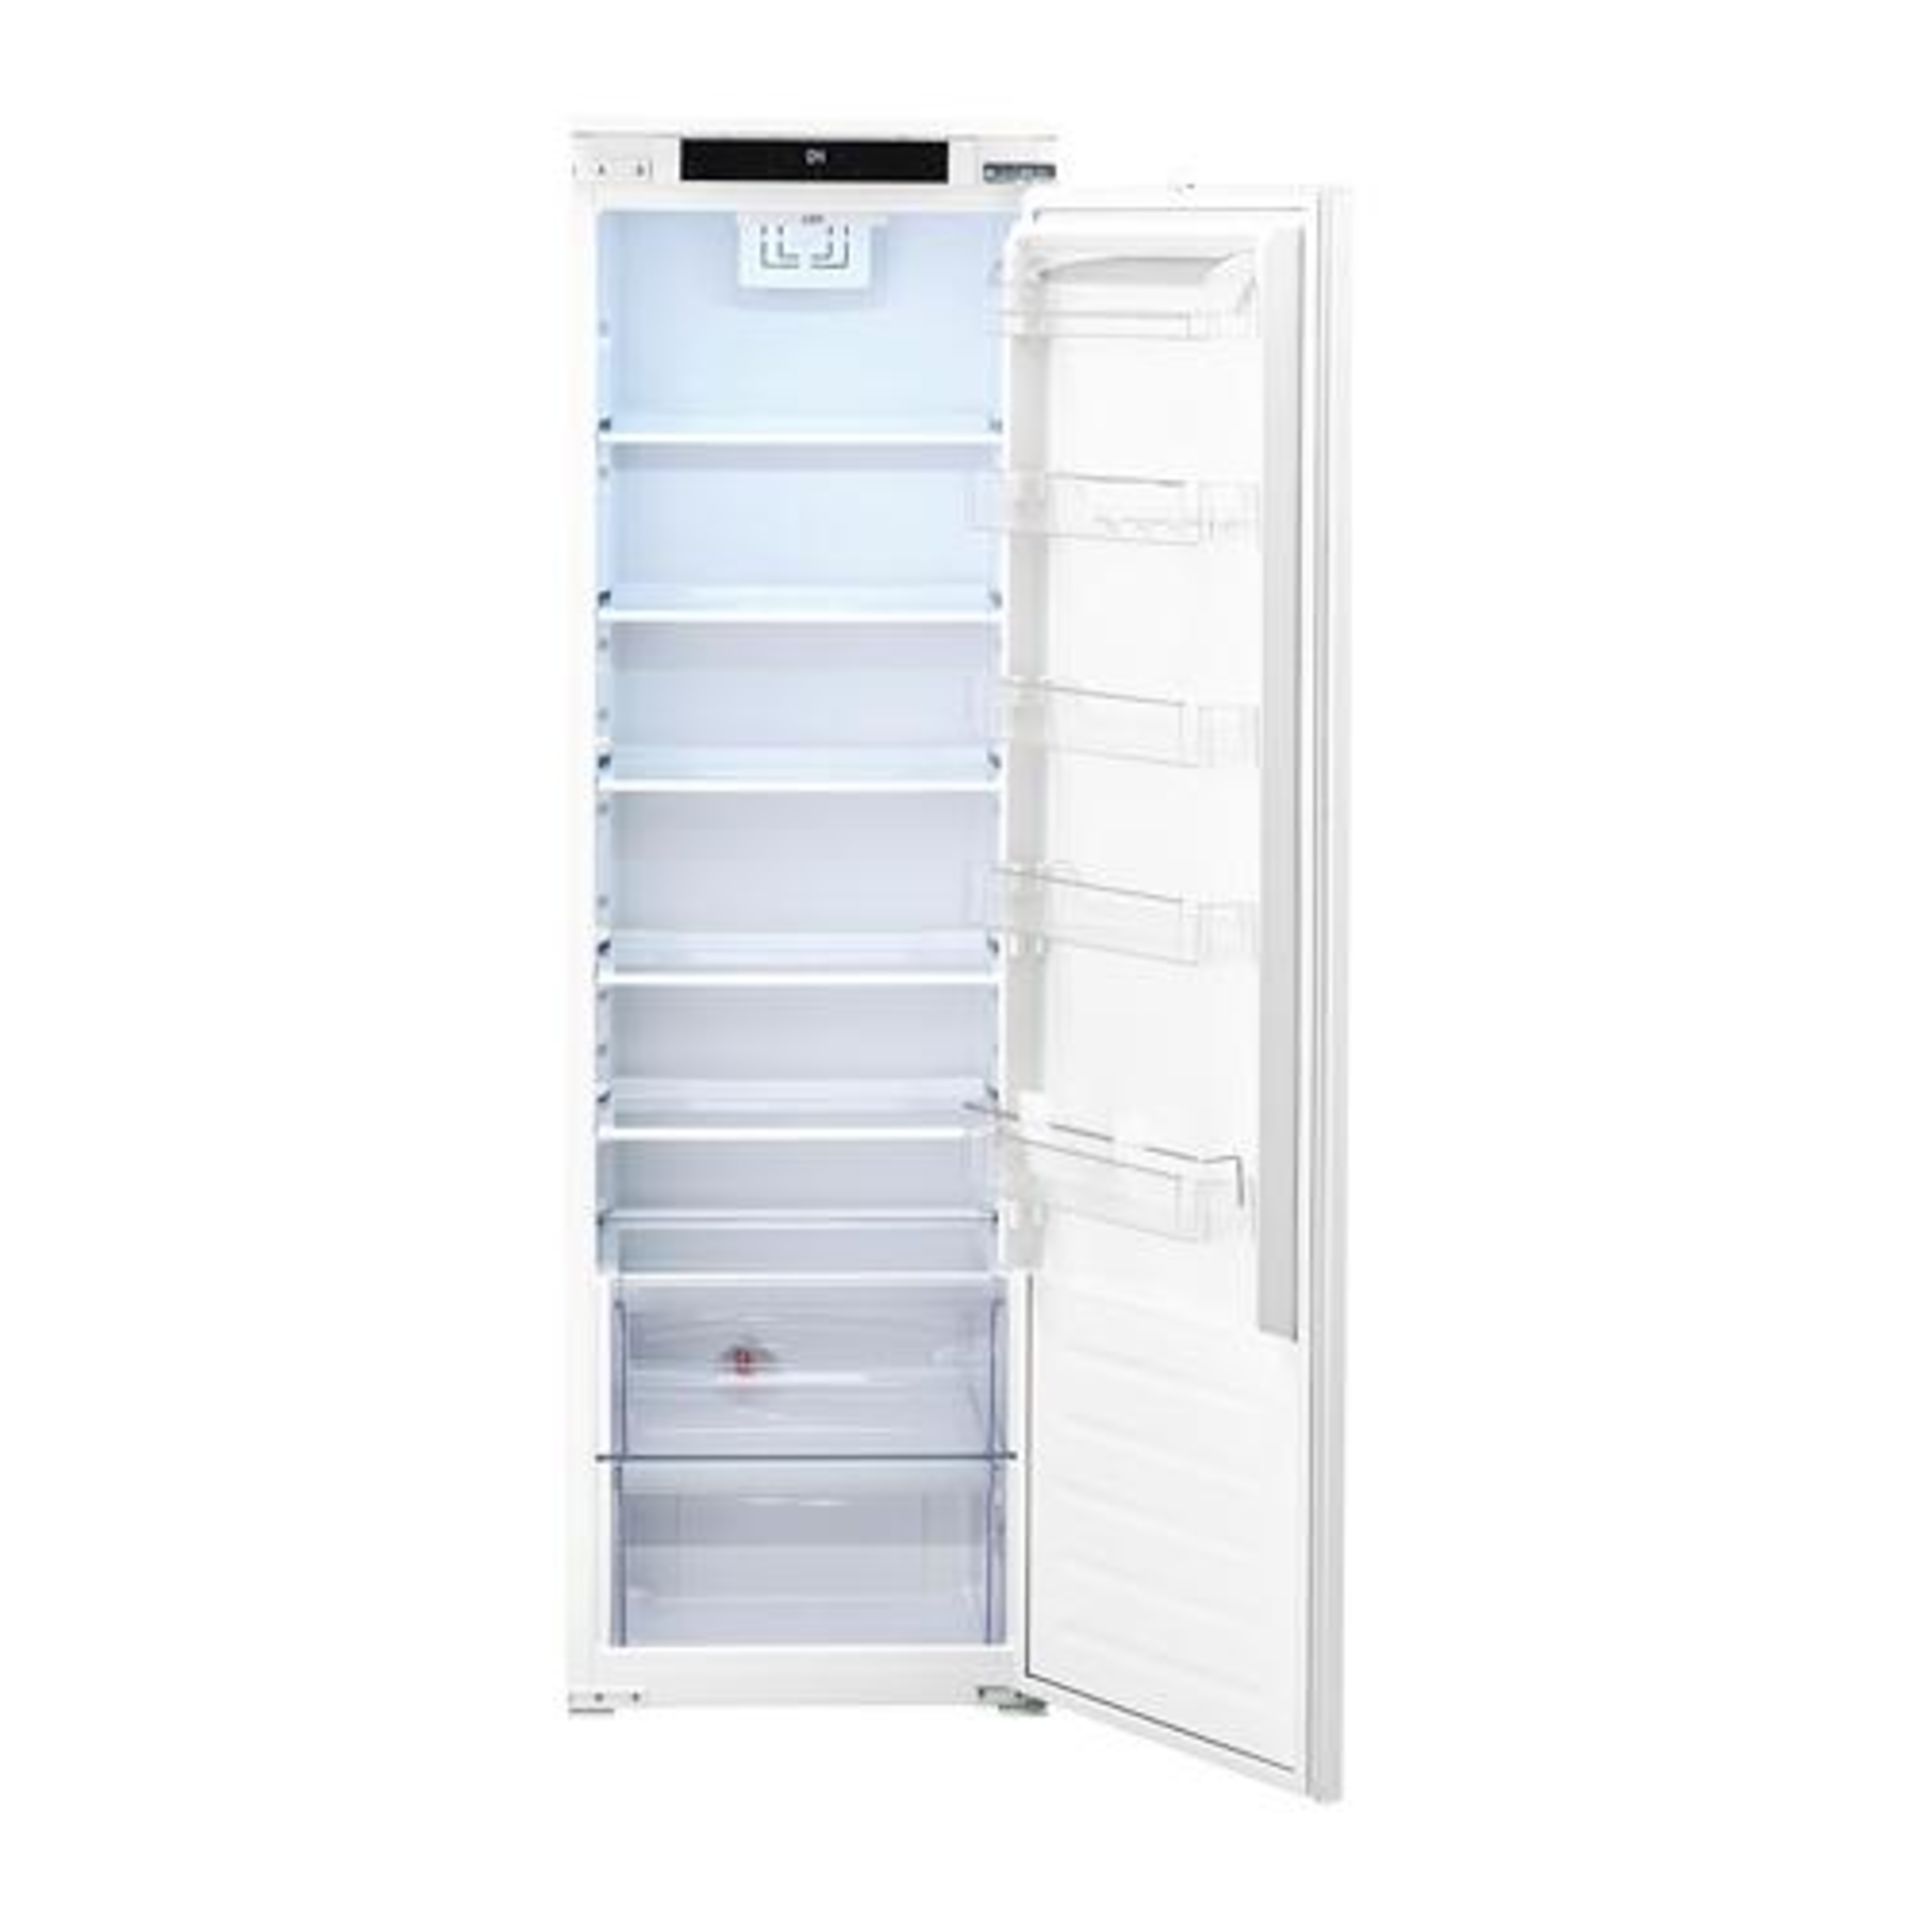 IKEA Single Door Fridge White FROSTIG RRP est. ??299 - The items in this lot are thought to be in